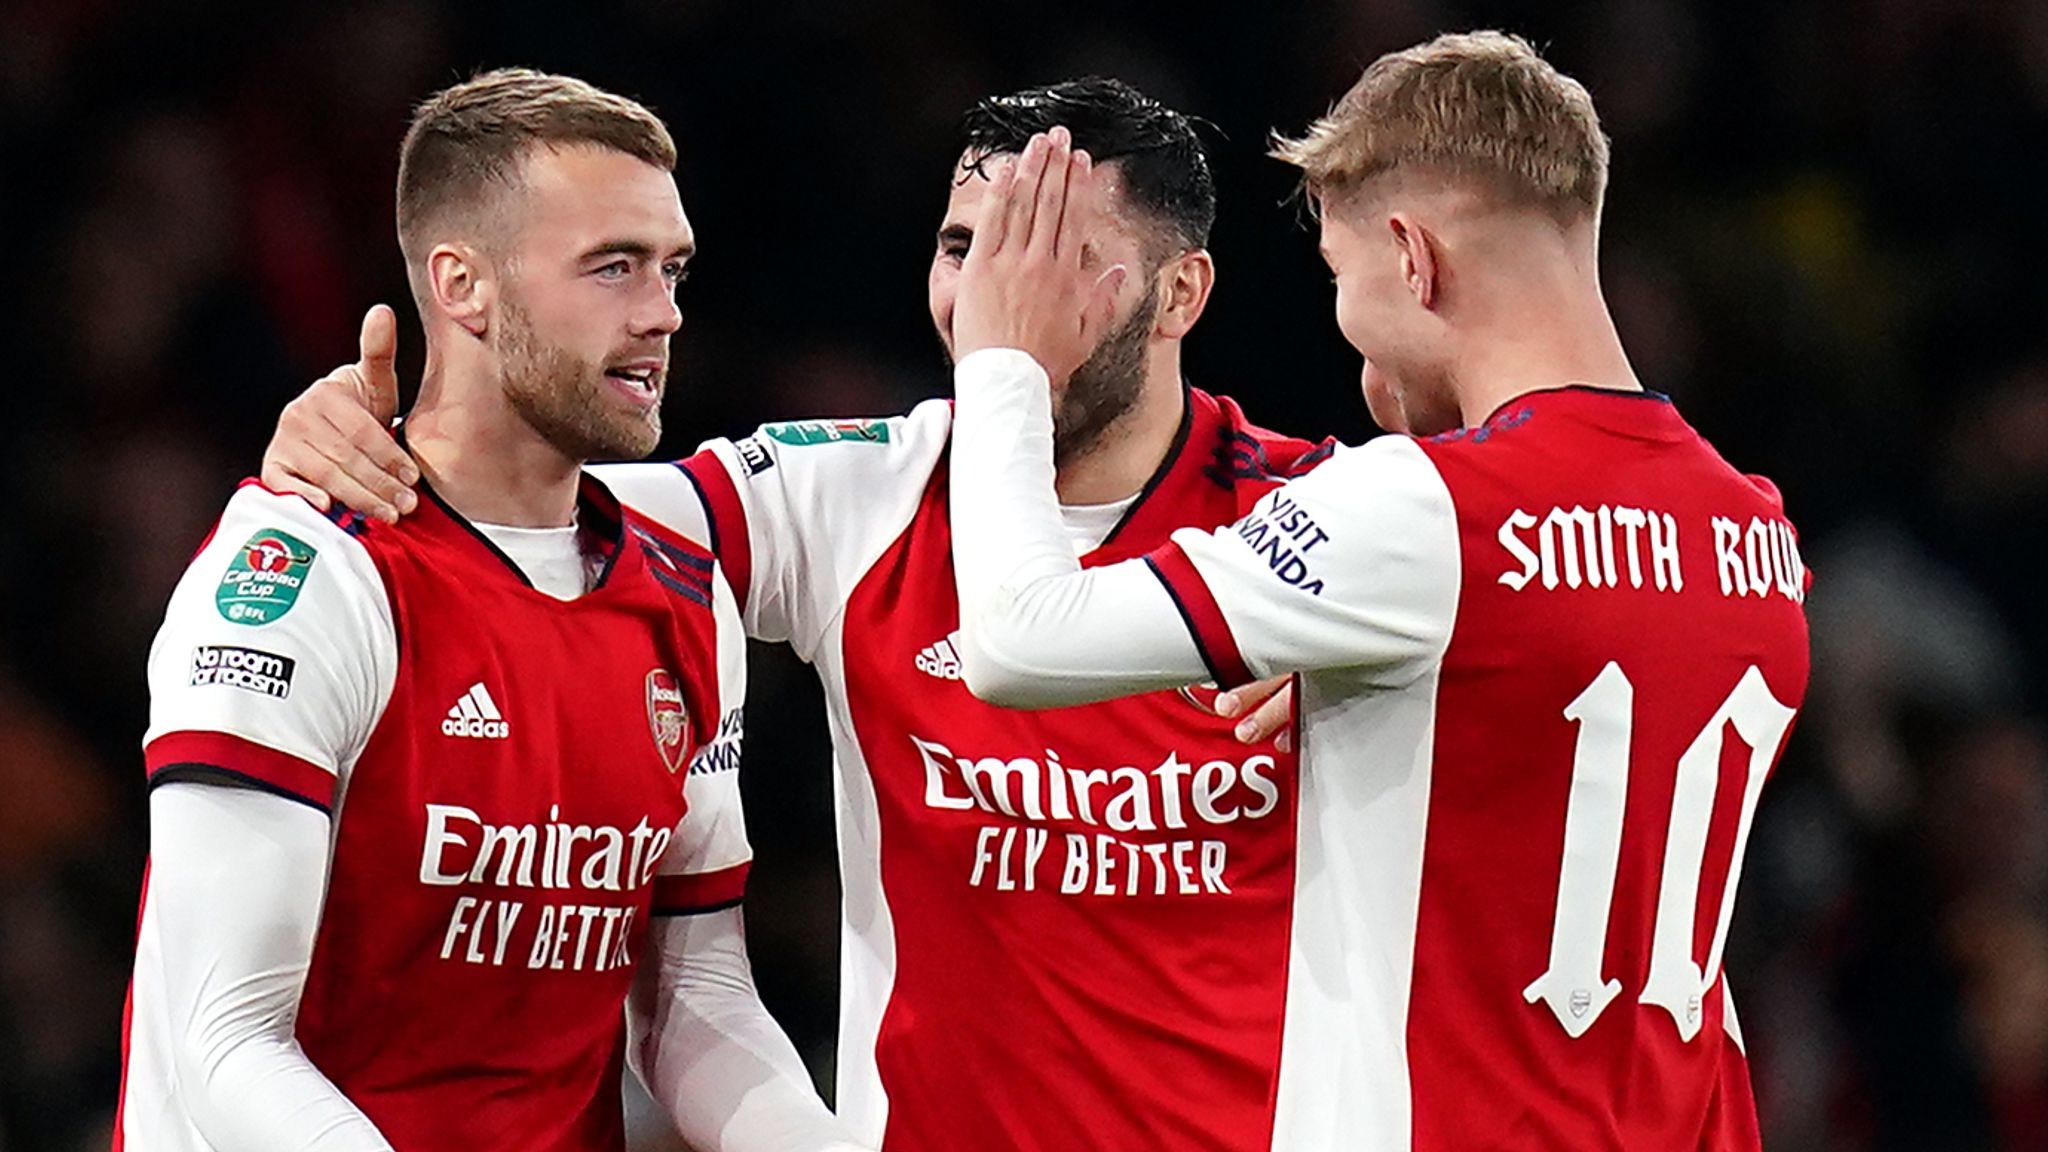 Arsenal - Sunderland Bets and Odds for the Carabao Cup quarter-final | December 21